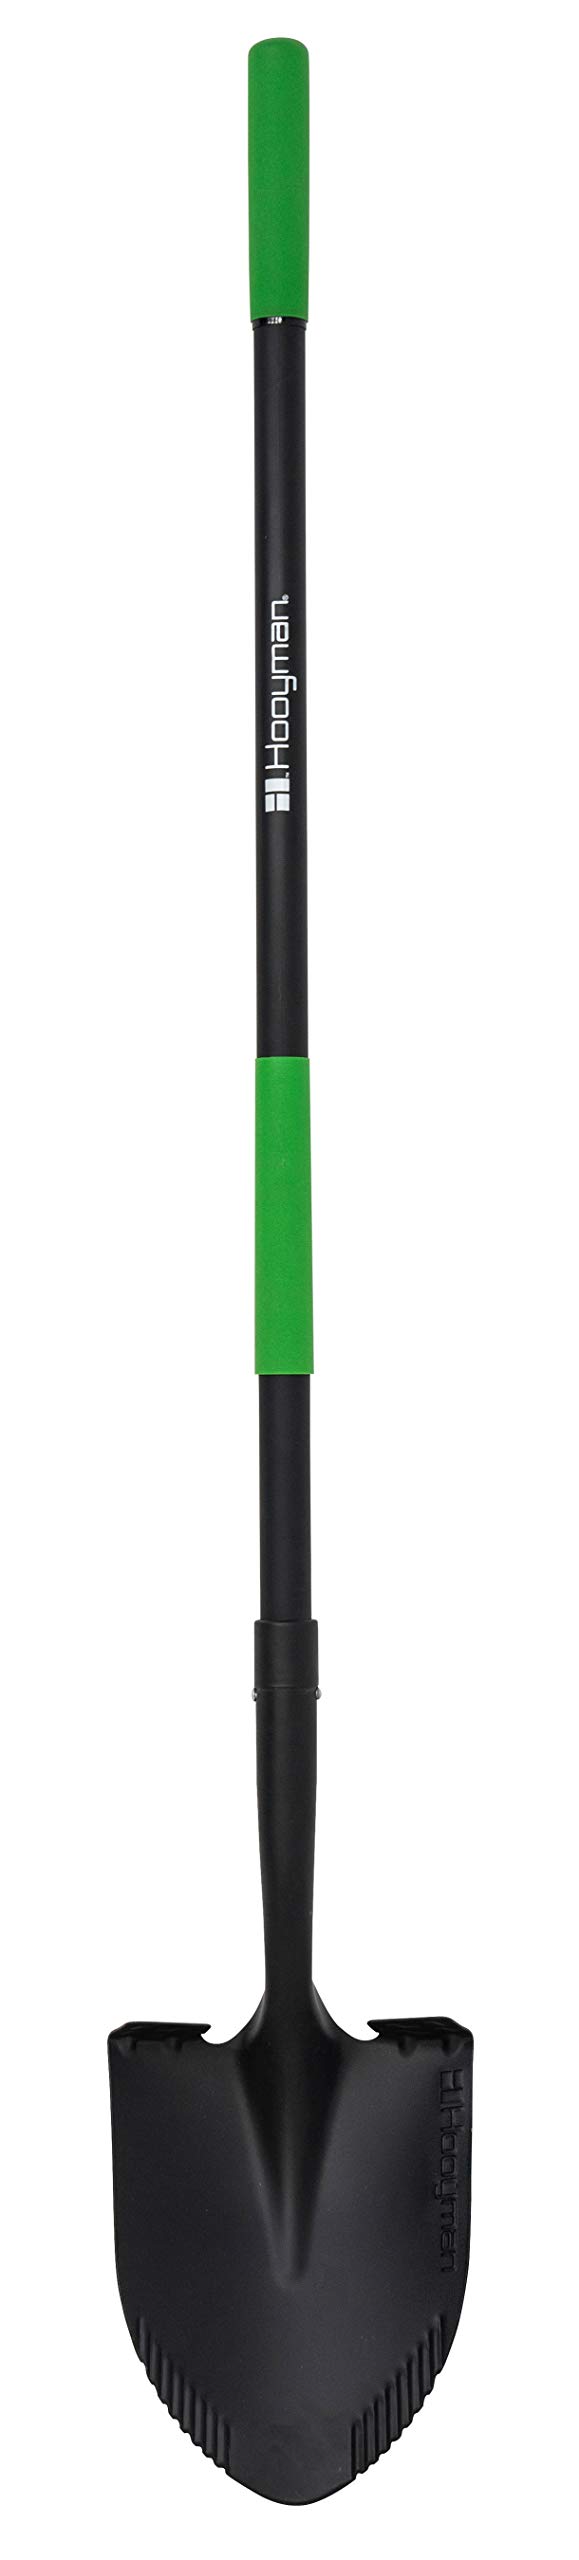 60" Hooyman Heave Duty Digging Shovel  $23.52 + Free Shipping w/ Prime or on $35+